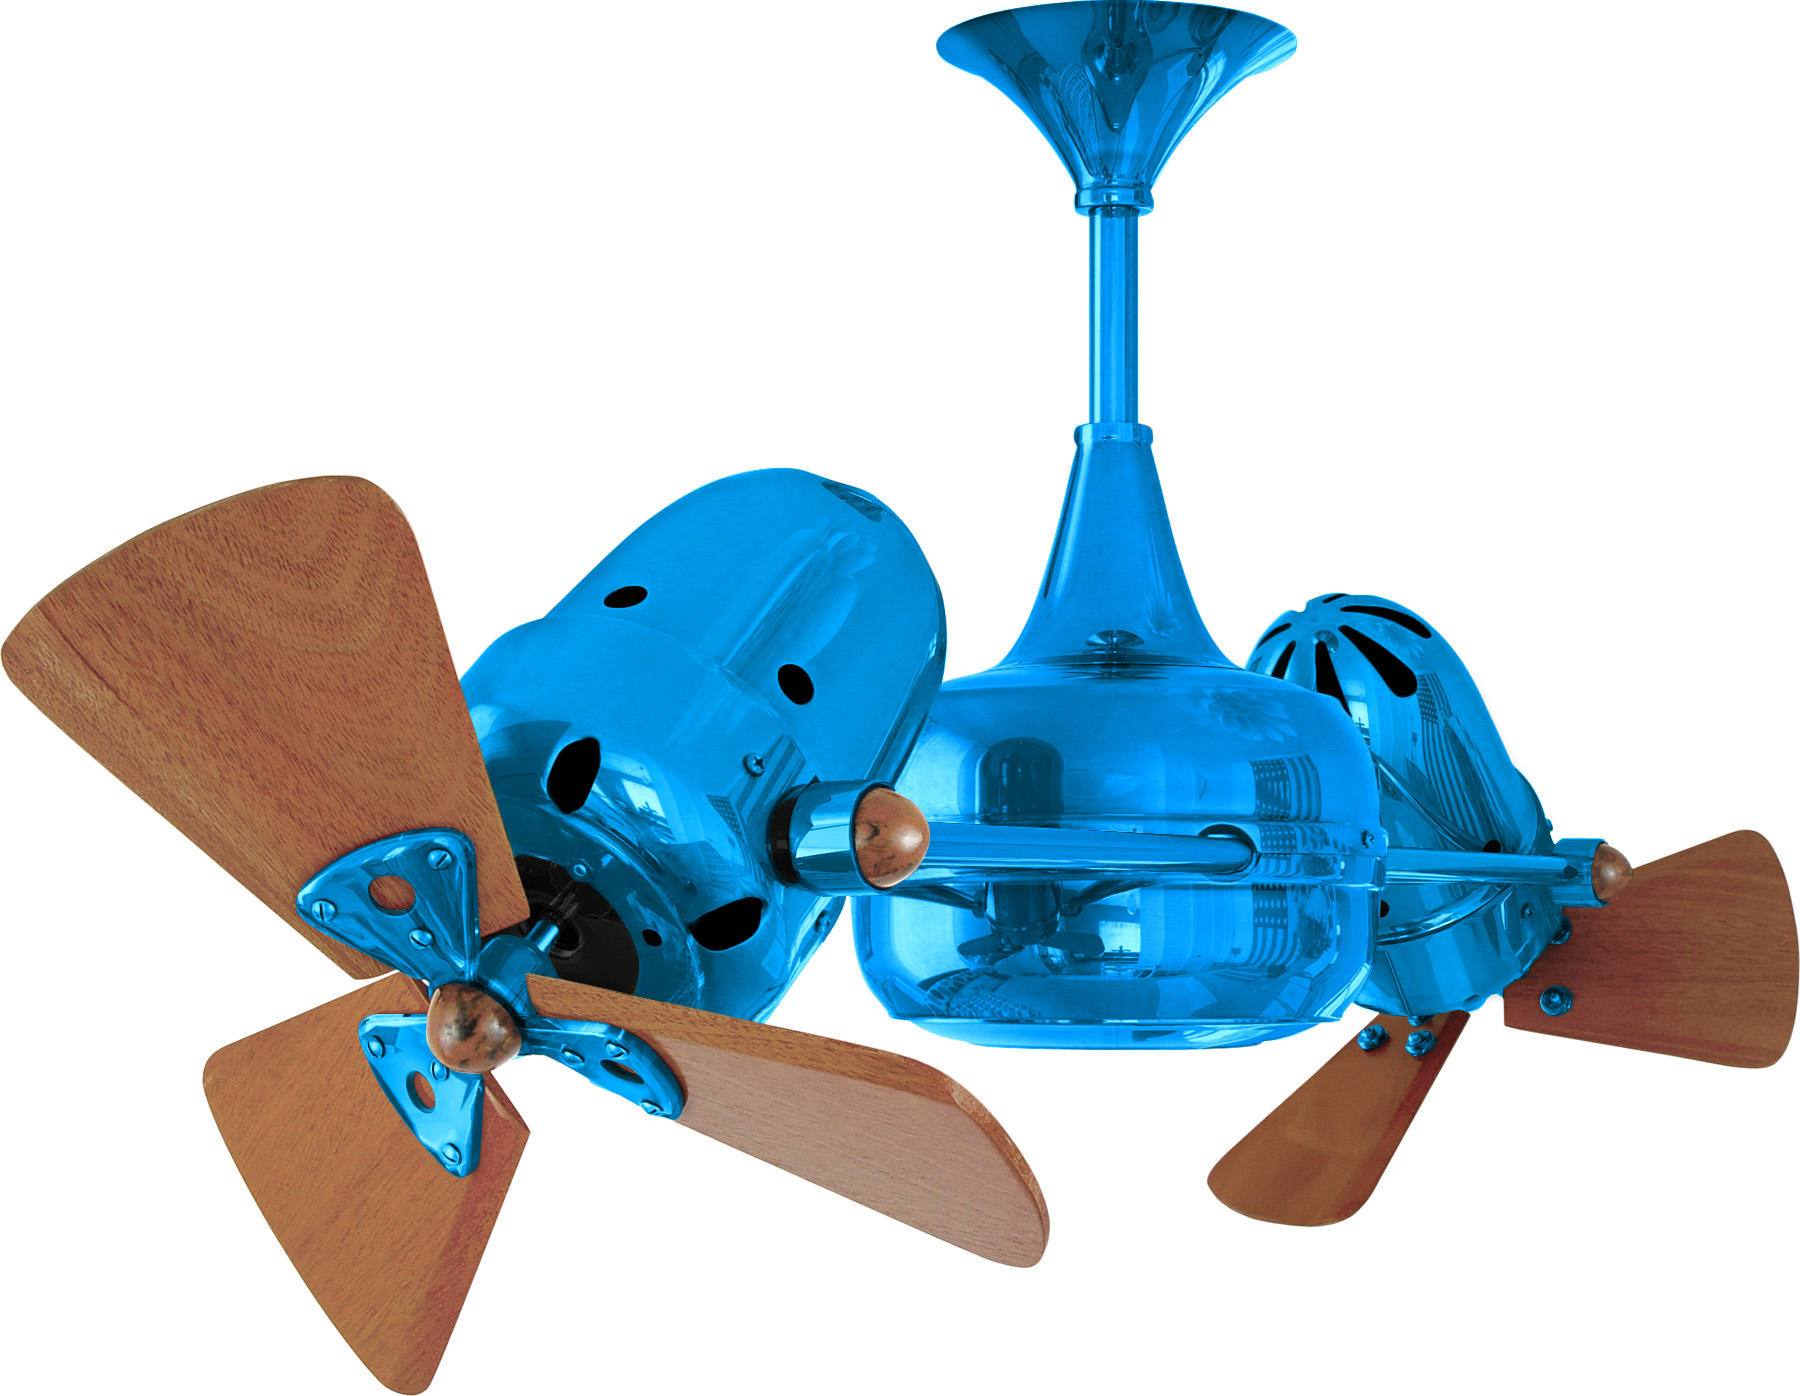 Duplo Dinamico rotational dual head ceiling fan in light blue / agua marinha finish with solid mahogany wood blades made by Matthews Fan Company.